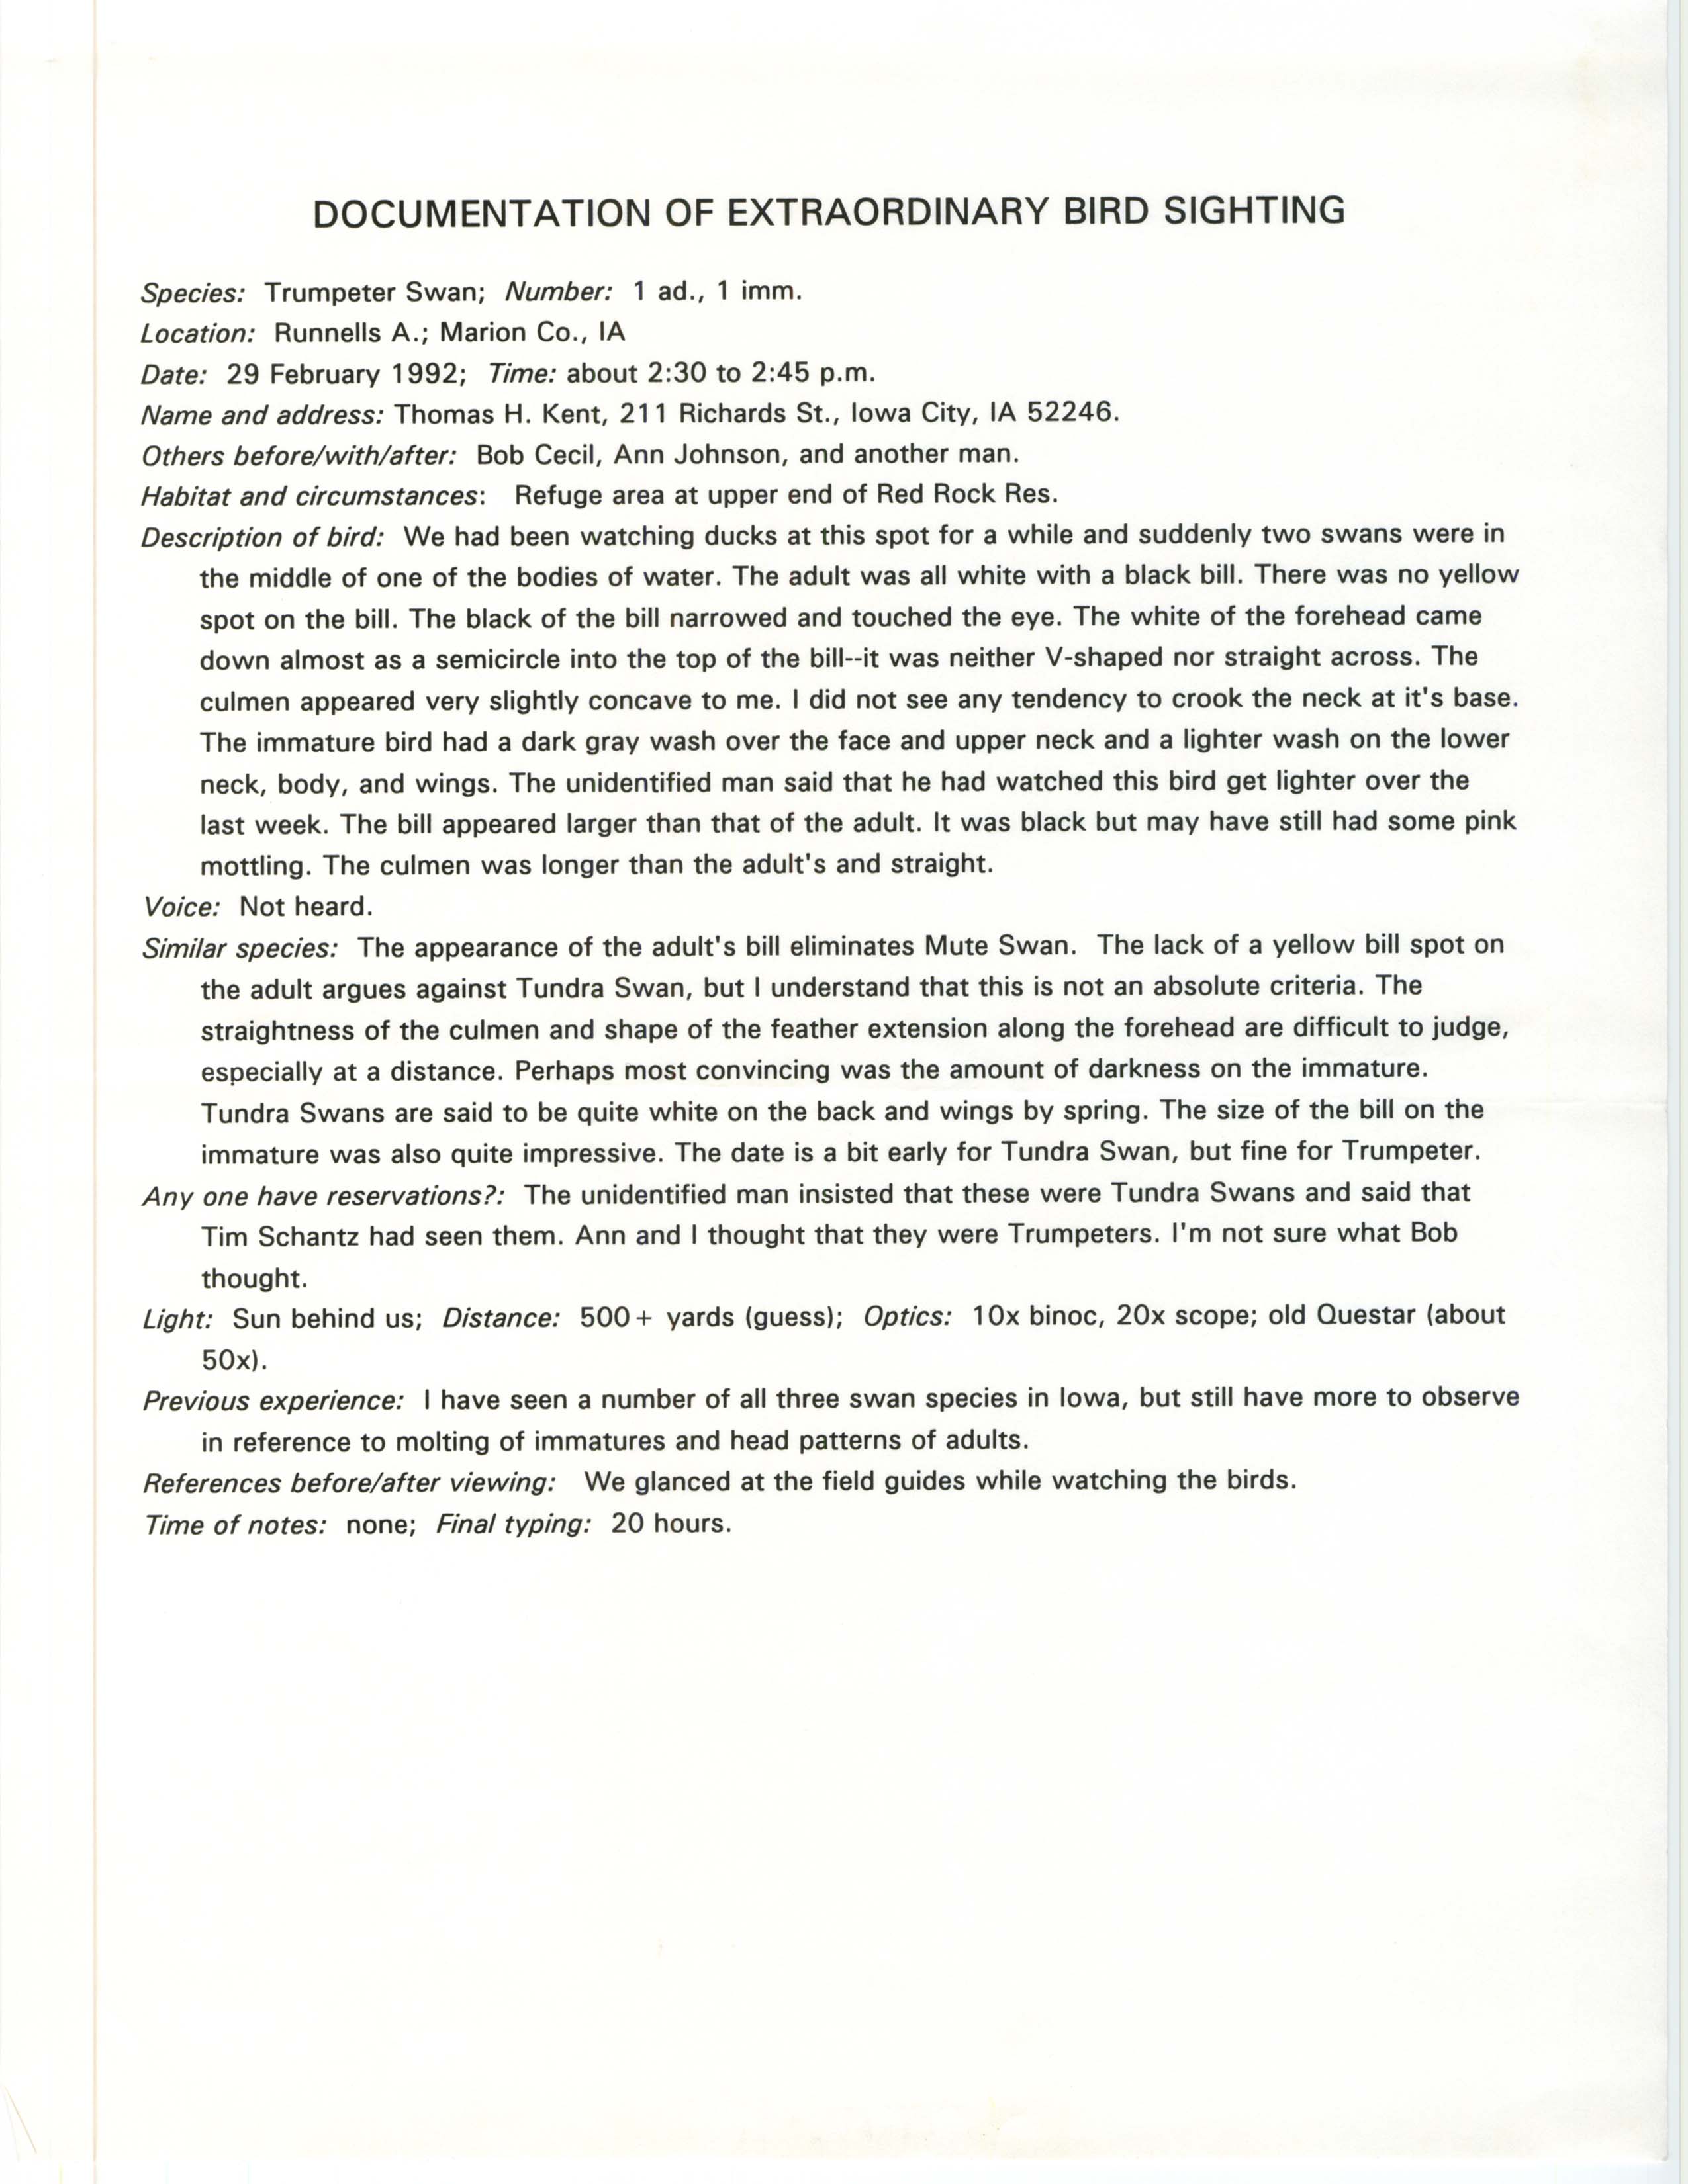 Rare bird documentation form for Trumpeter Swan at Runnells Area, 1992